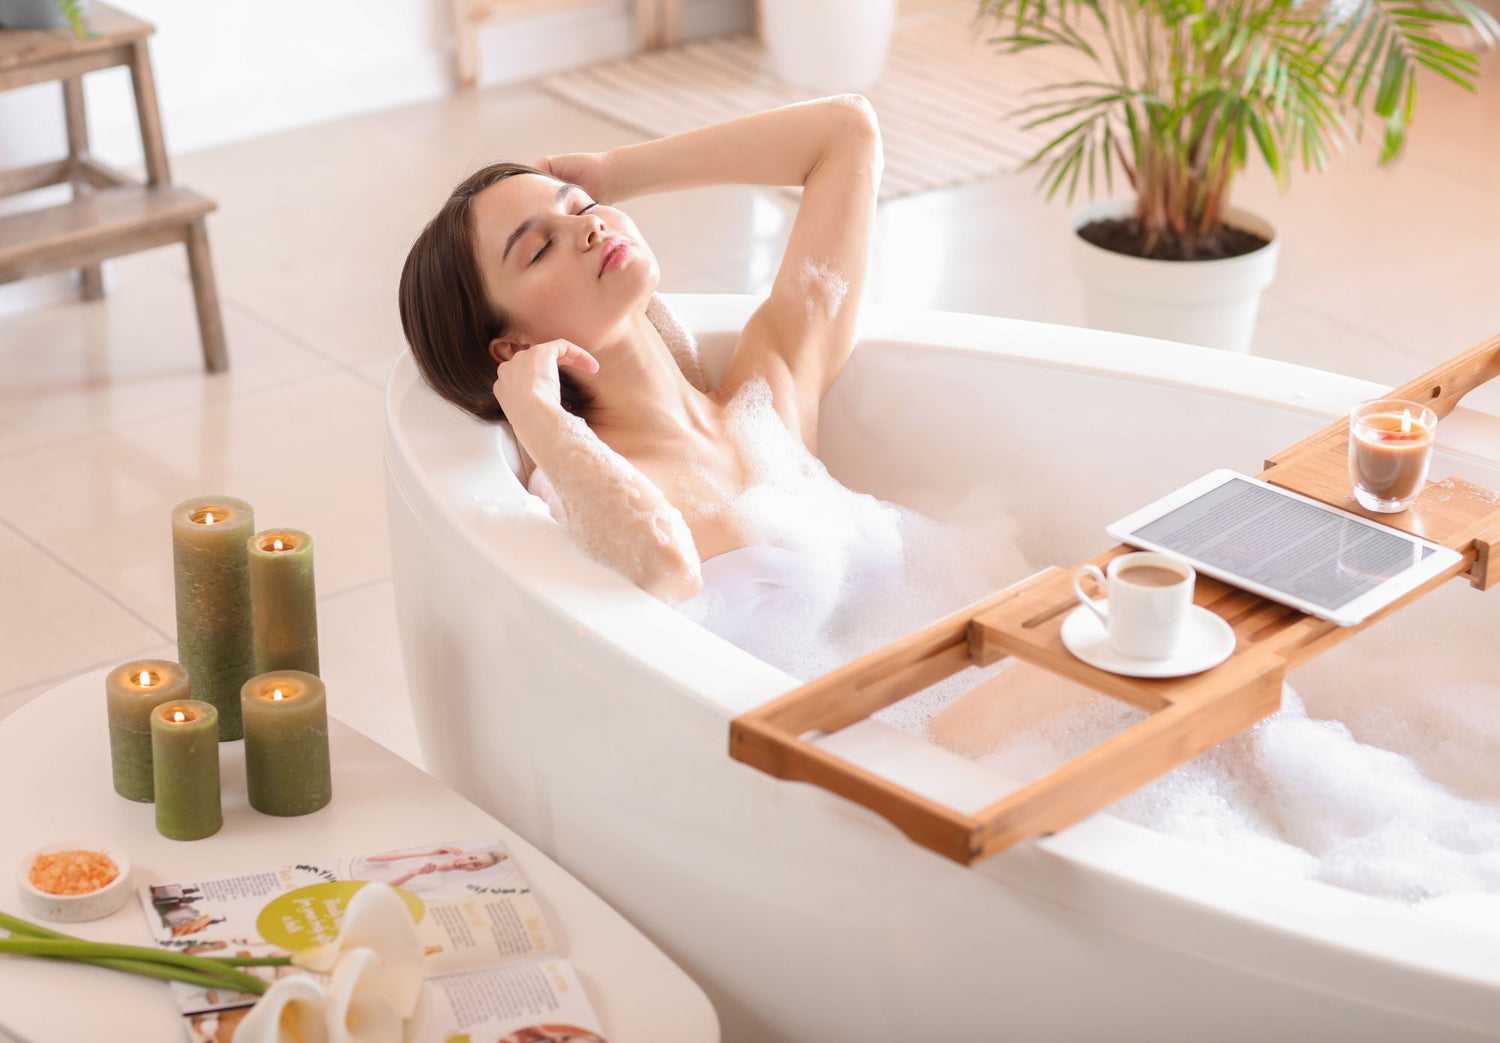 The Joy of Pampering: Creating an At-Home Spa Experience